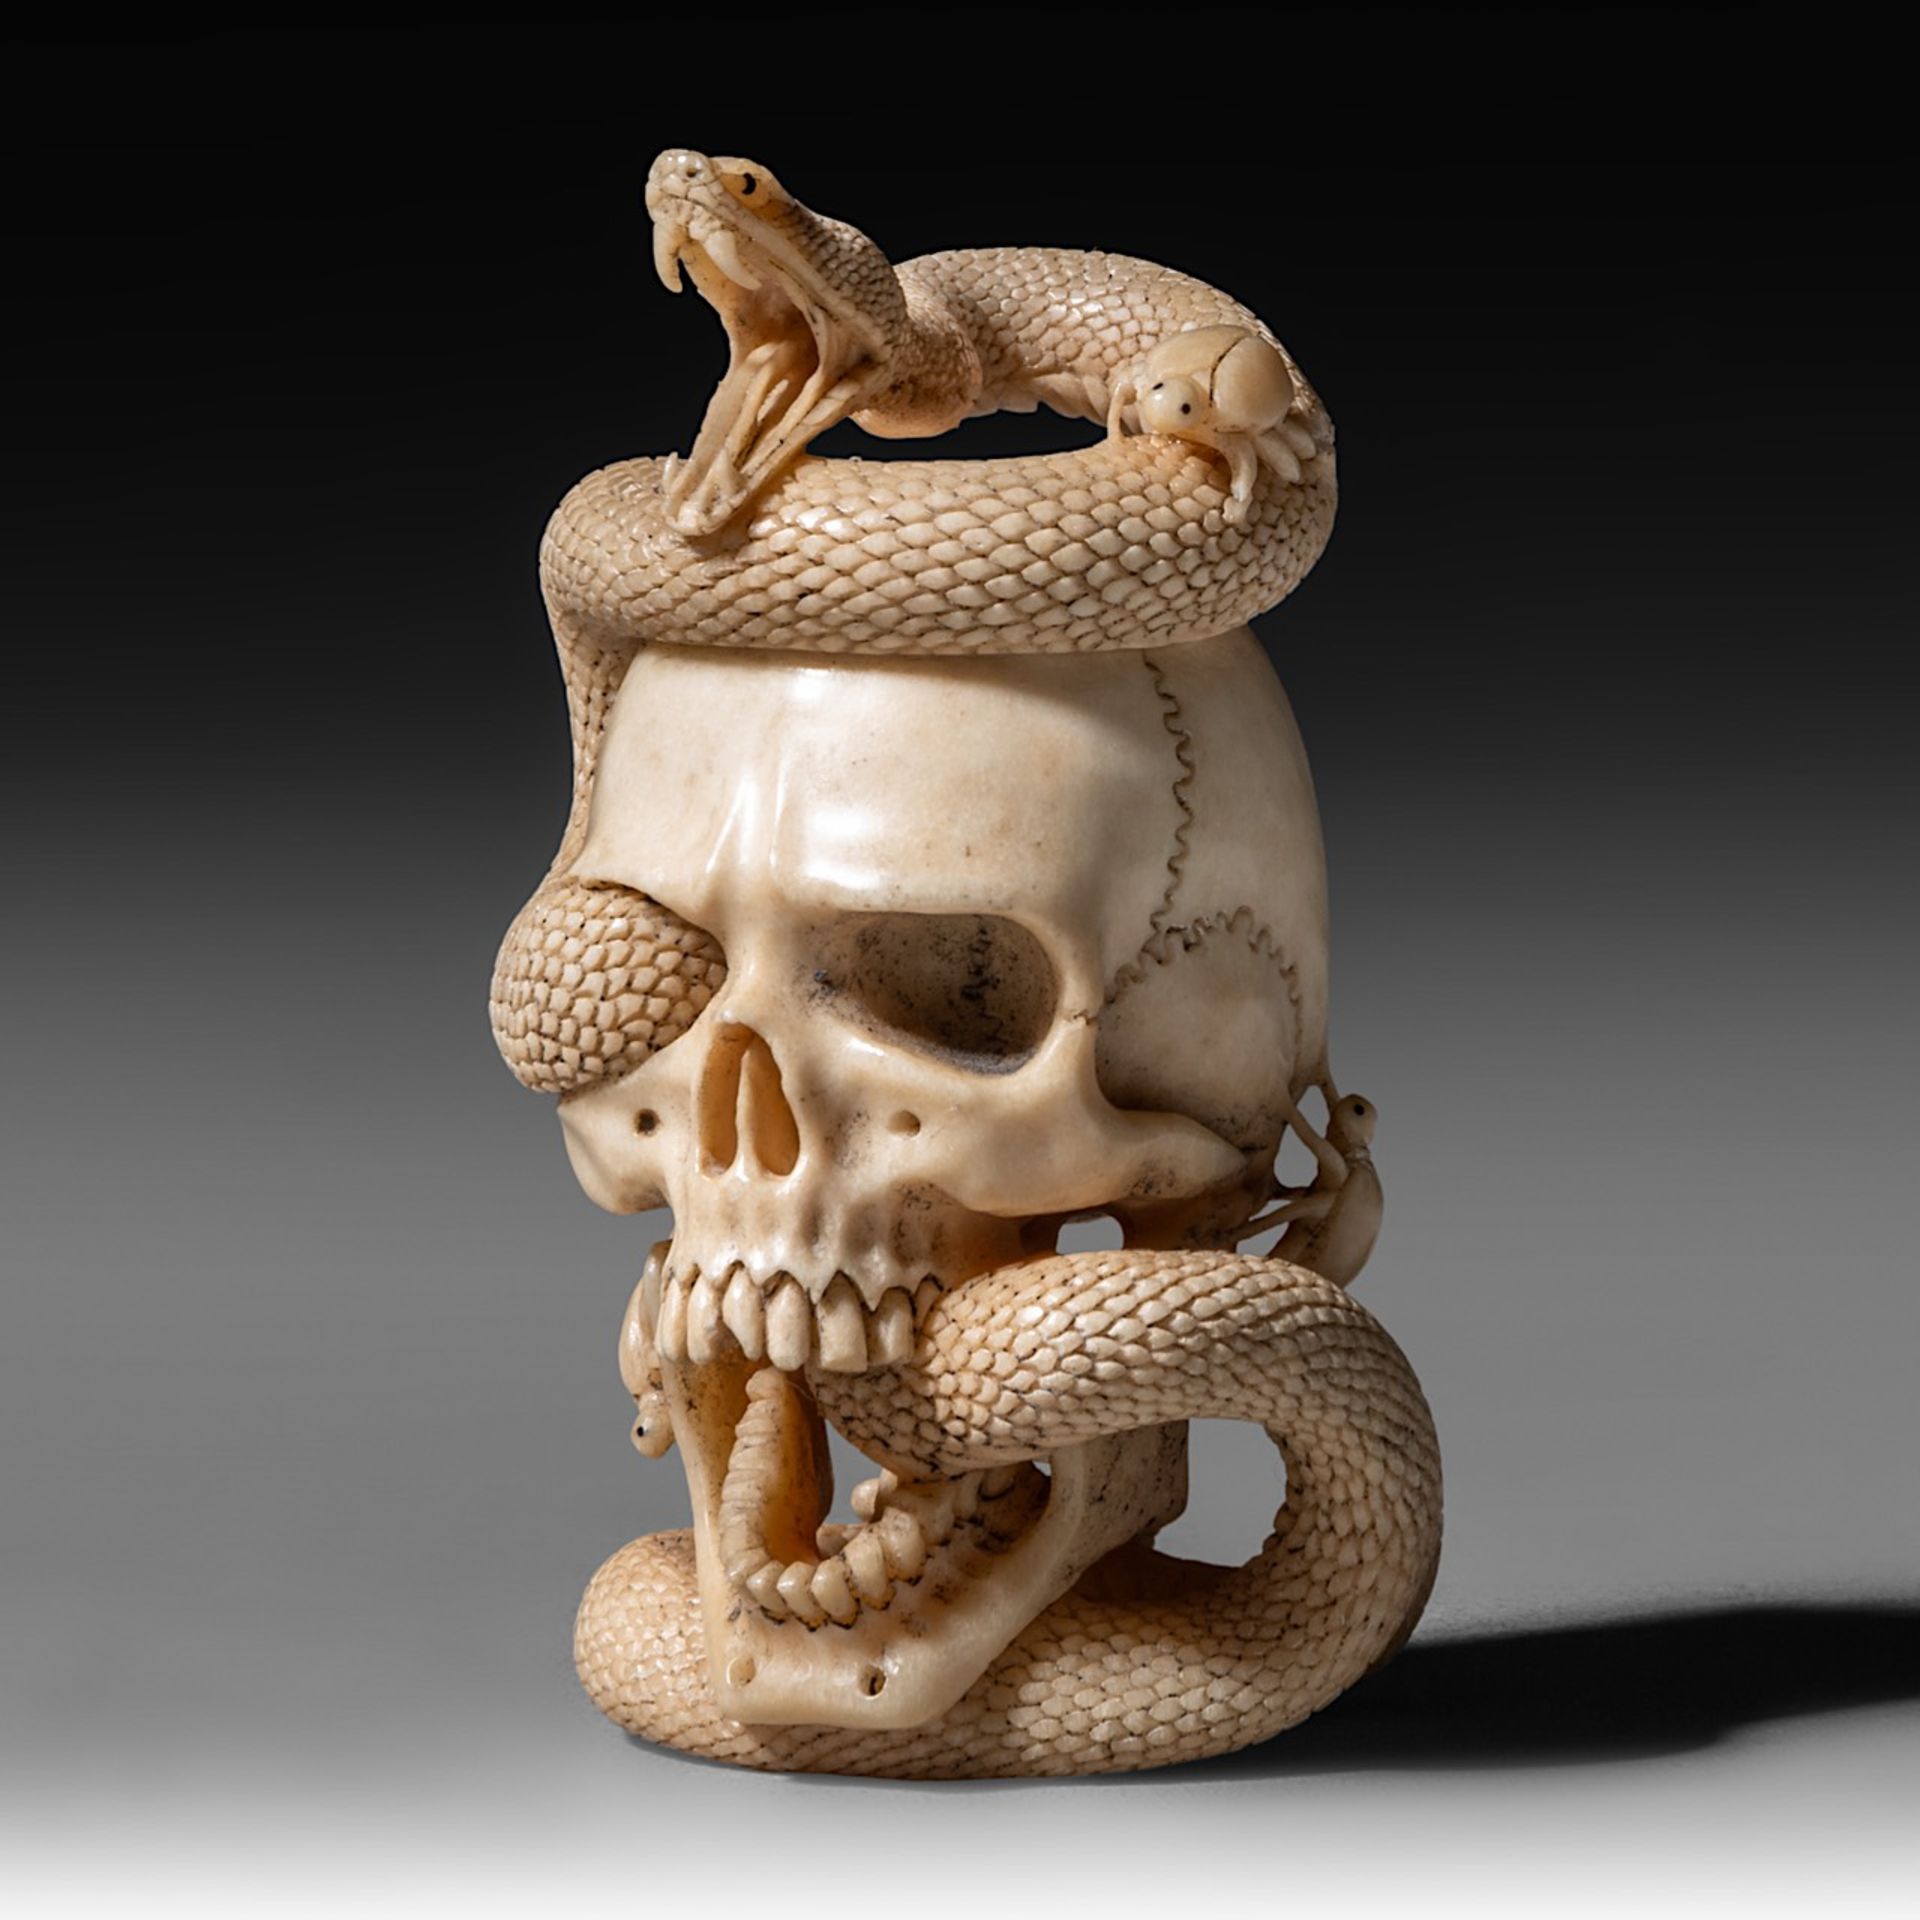 A (German) skull and snake sculpture, bone, 18th - 19th century, H 7,9 cm - weight 79 g - Image 2 of 9